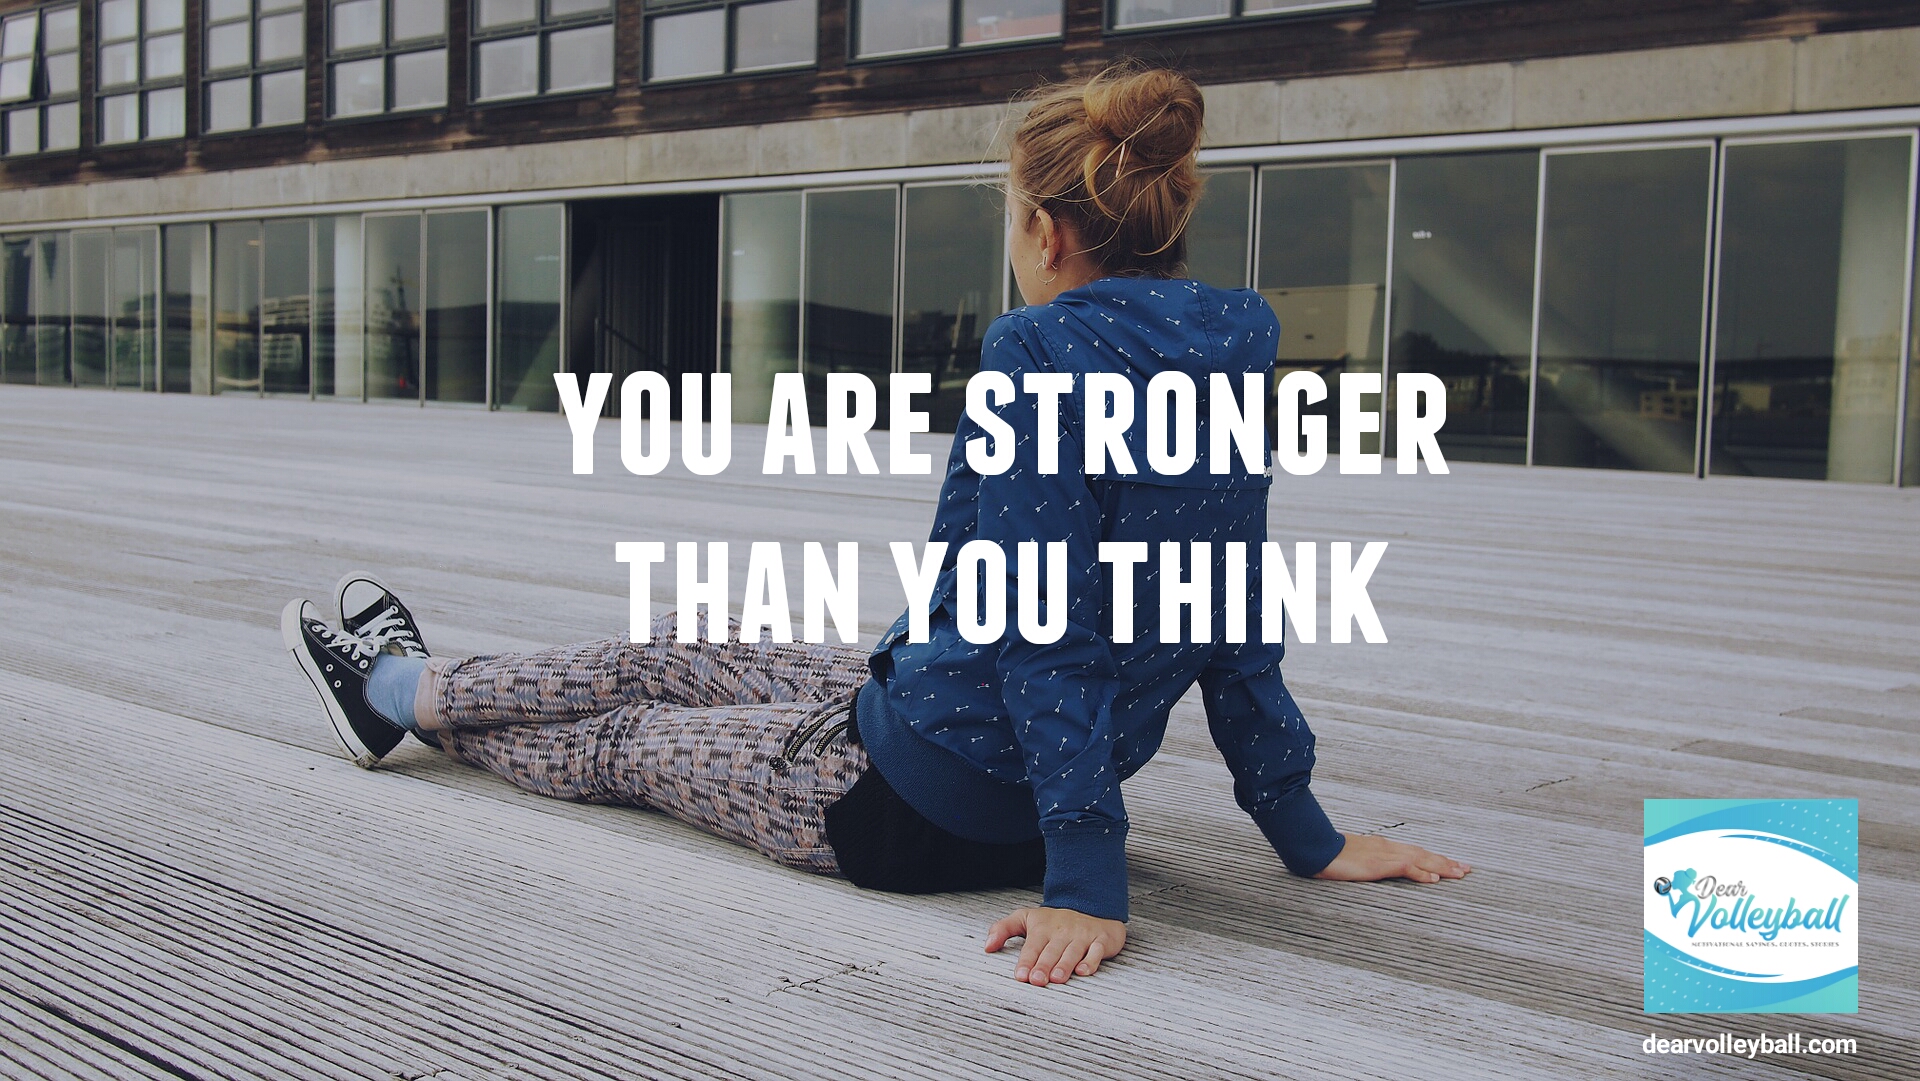 "You are stronger than you think." and other strong girls pictures paired with an inspirational volleyball quote on Dear Volleyball.com.